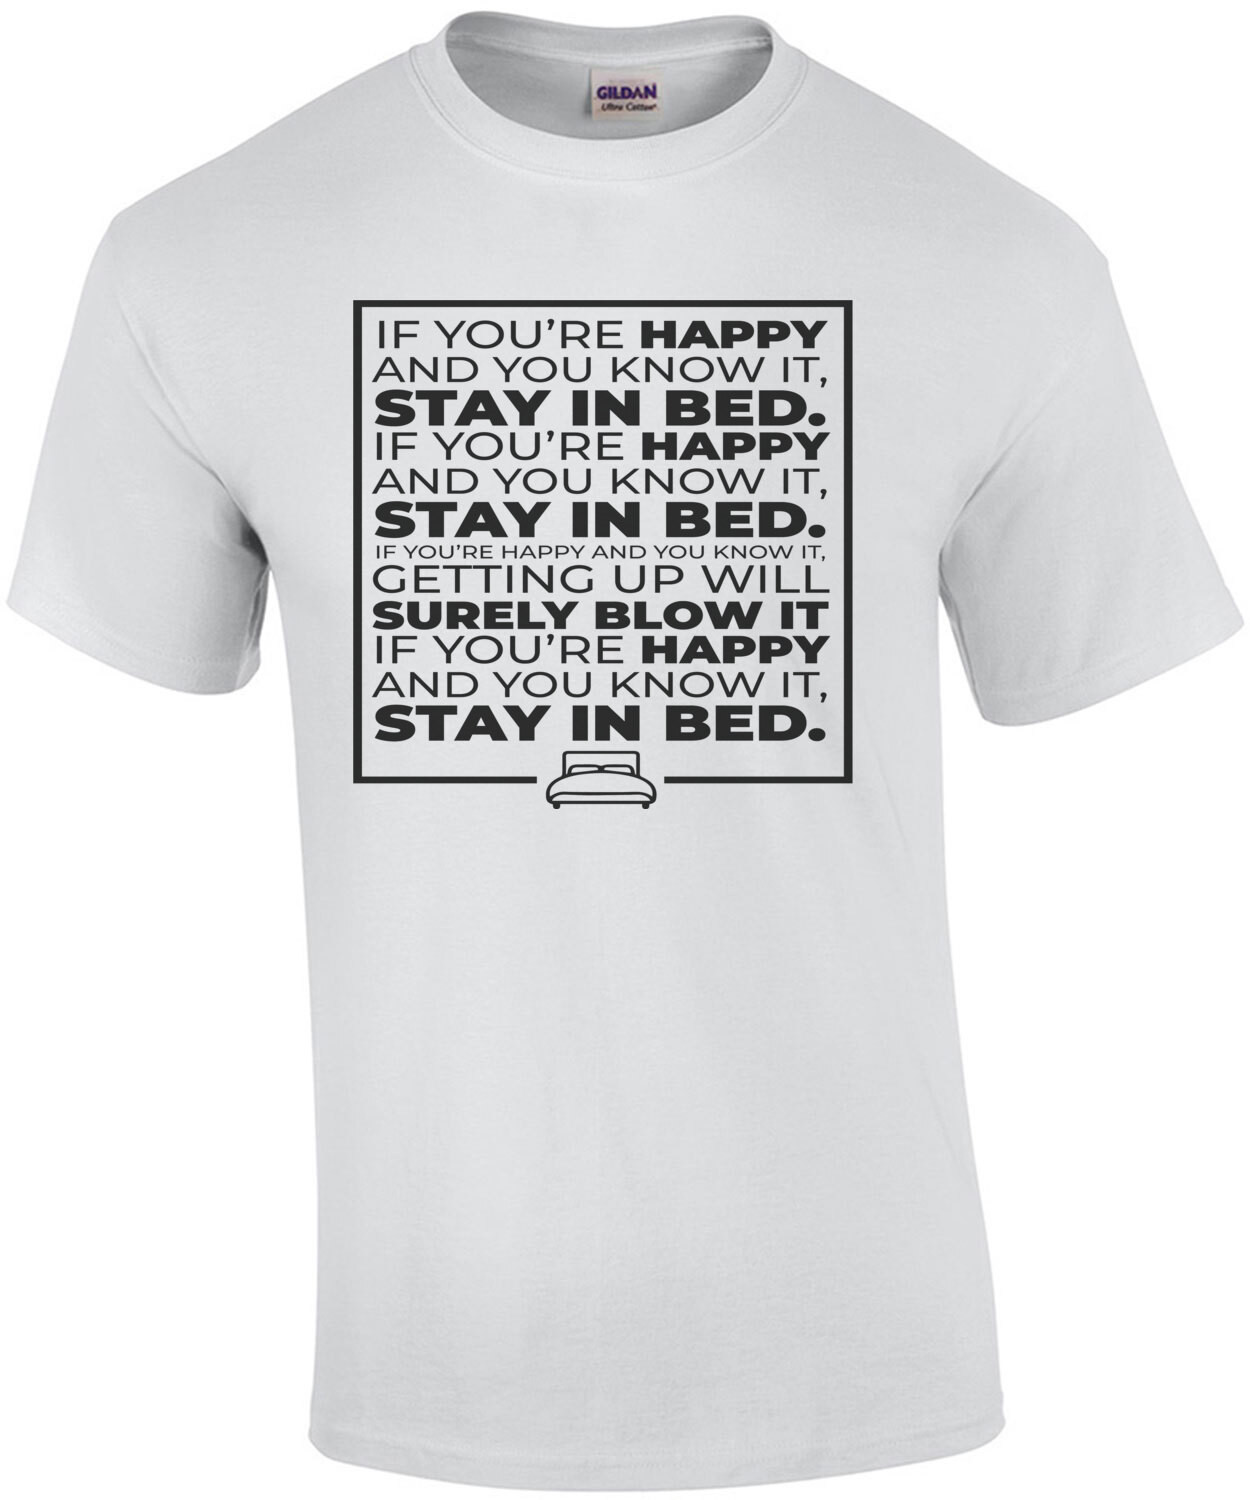 If you're happy and you know it stay in bed - funny t-shirt